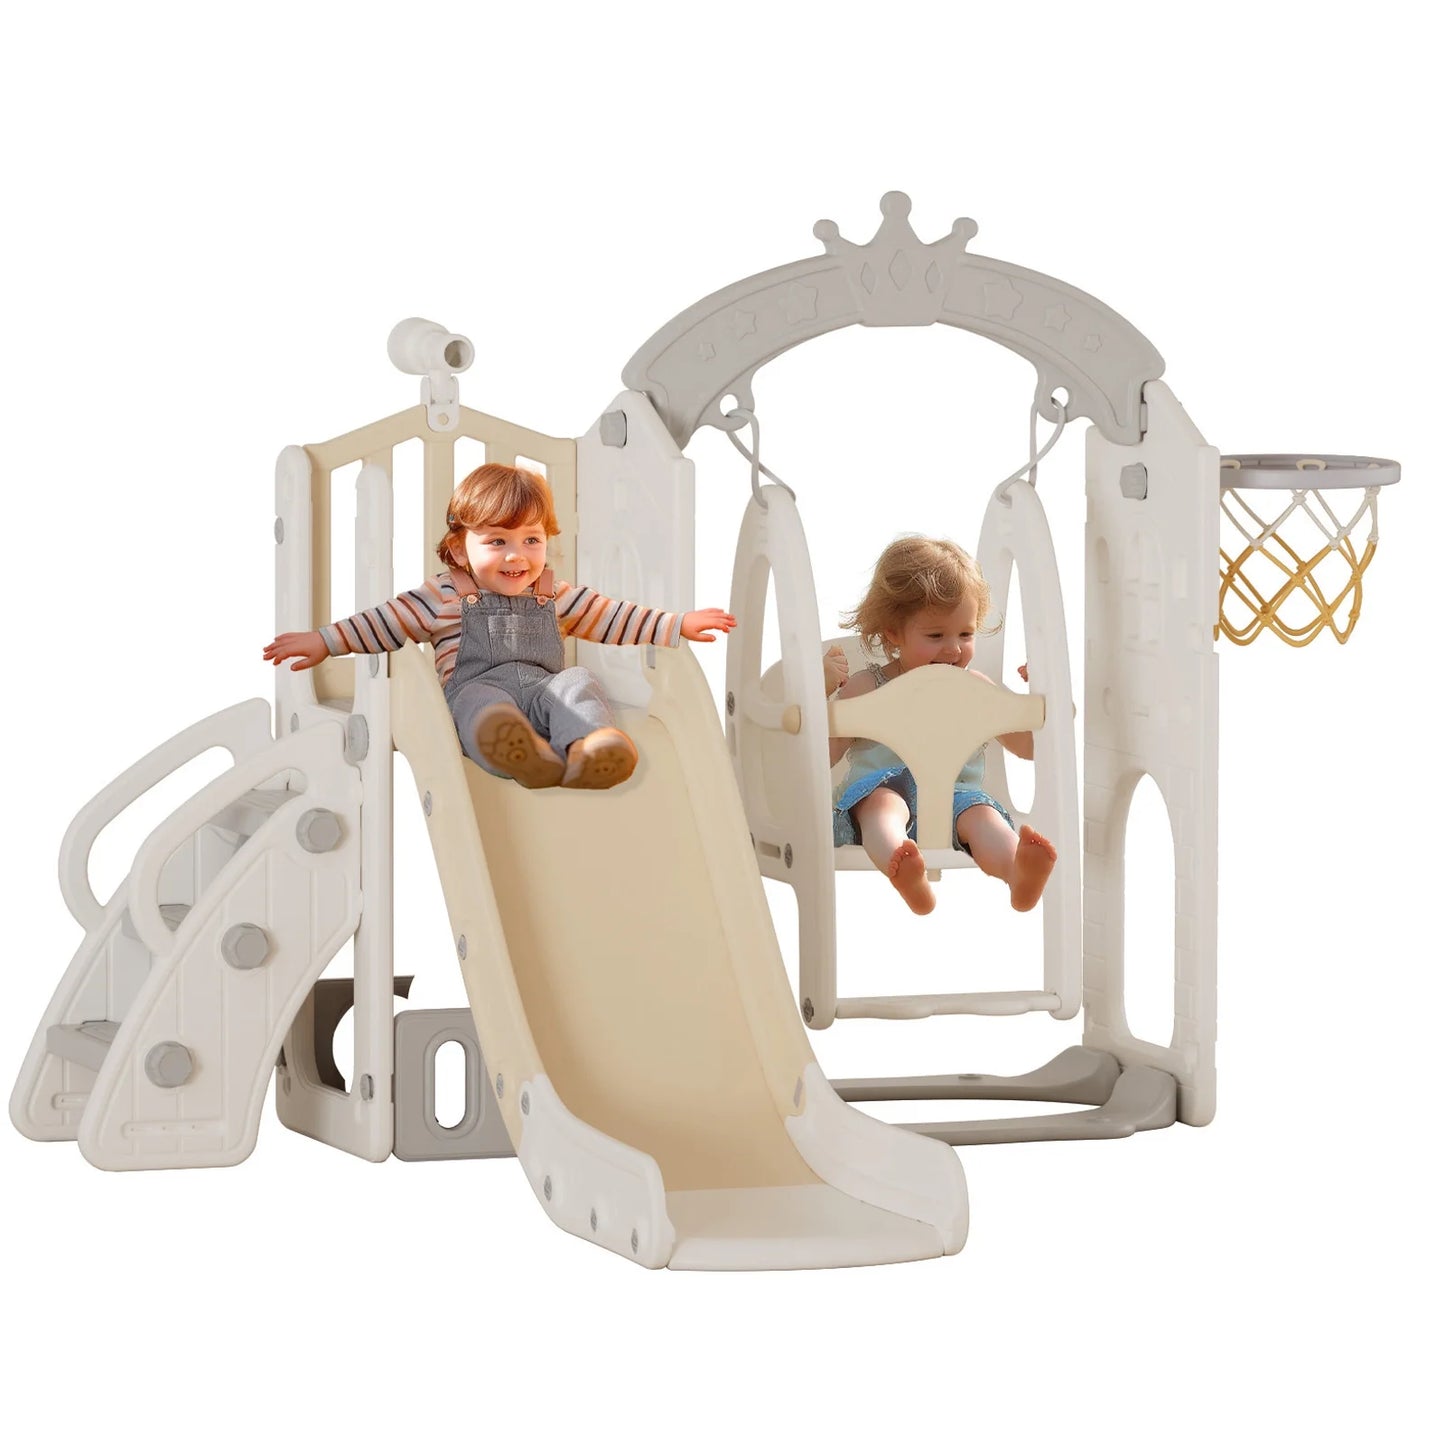 4 in 1 Toddler Slide and Swing Set, Kids Large Climber Slide Playset with Basketball Hoop Playground Swing Set for Indoor Outdoor Backyard 1-6 Gifts